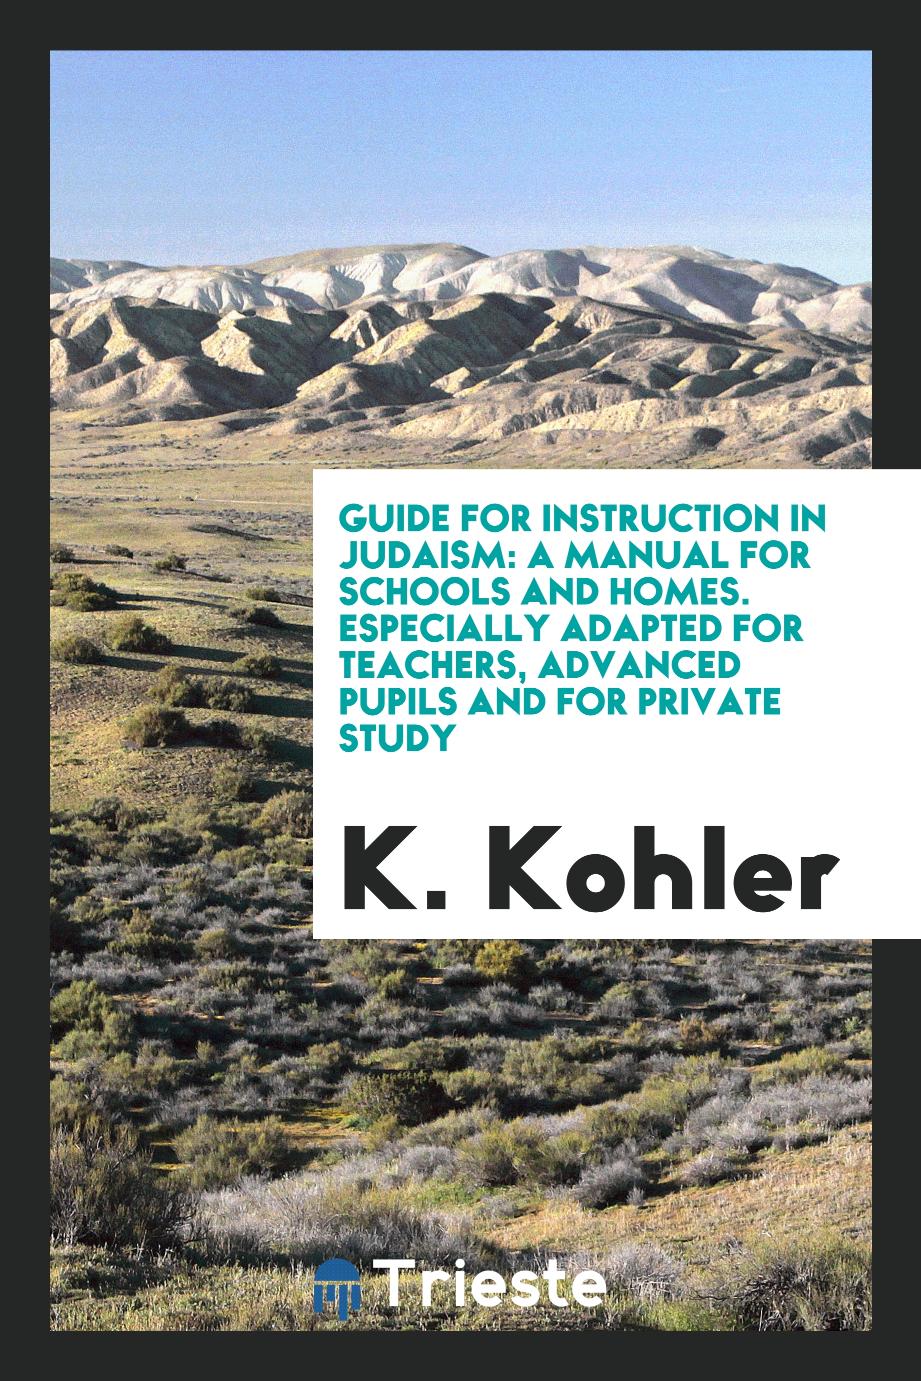 Guide for Instruction in Judaism: A Manual for Schools and Homes. Especially Adapted for Teachers, Advanced Pupils and for Private Study